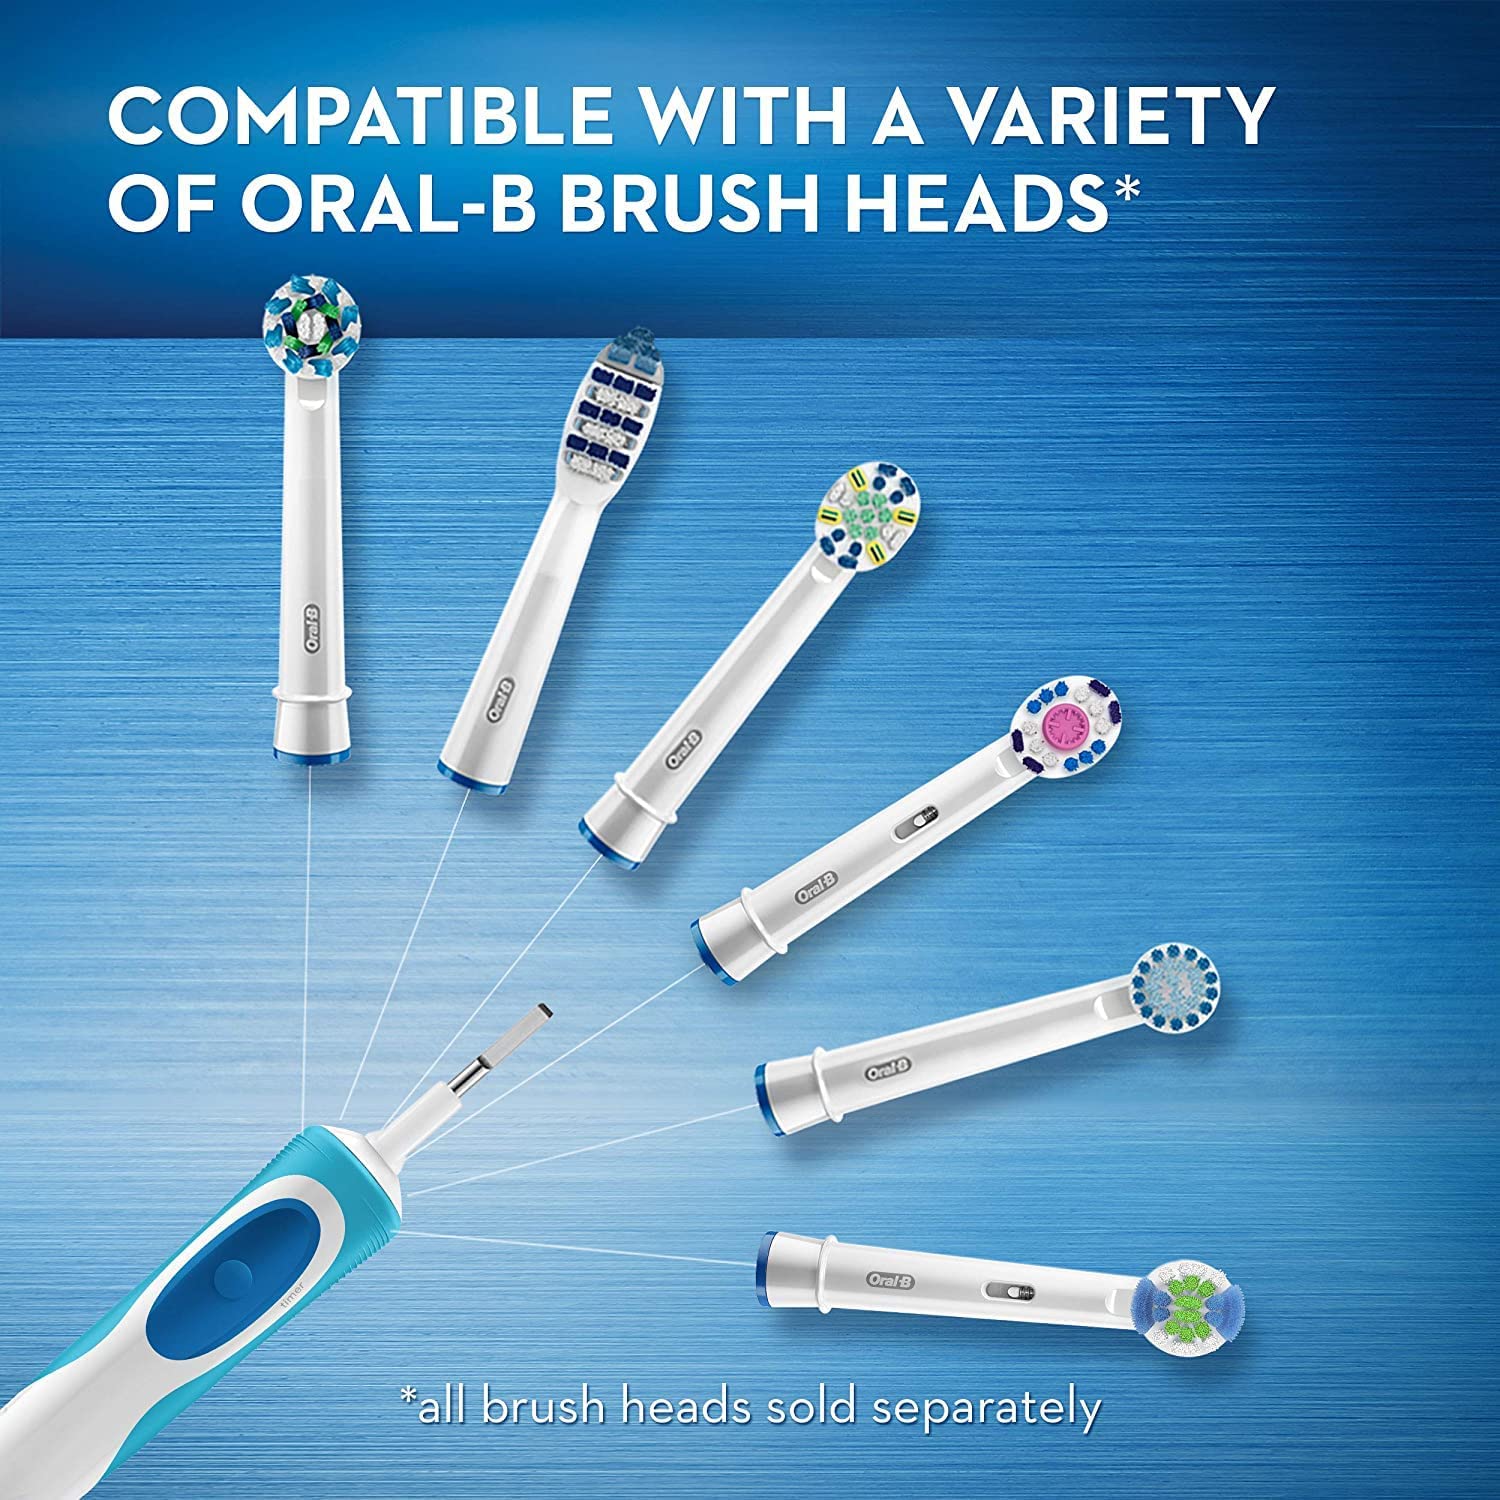 Vitality Clean Power Toothbrush